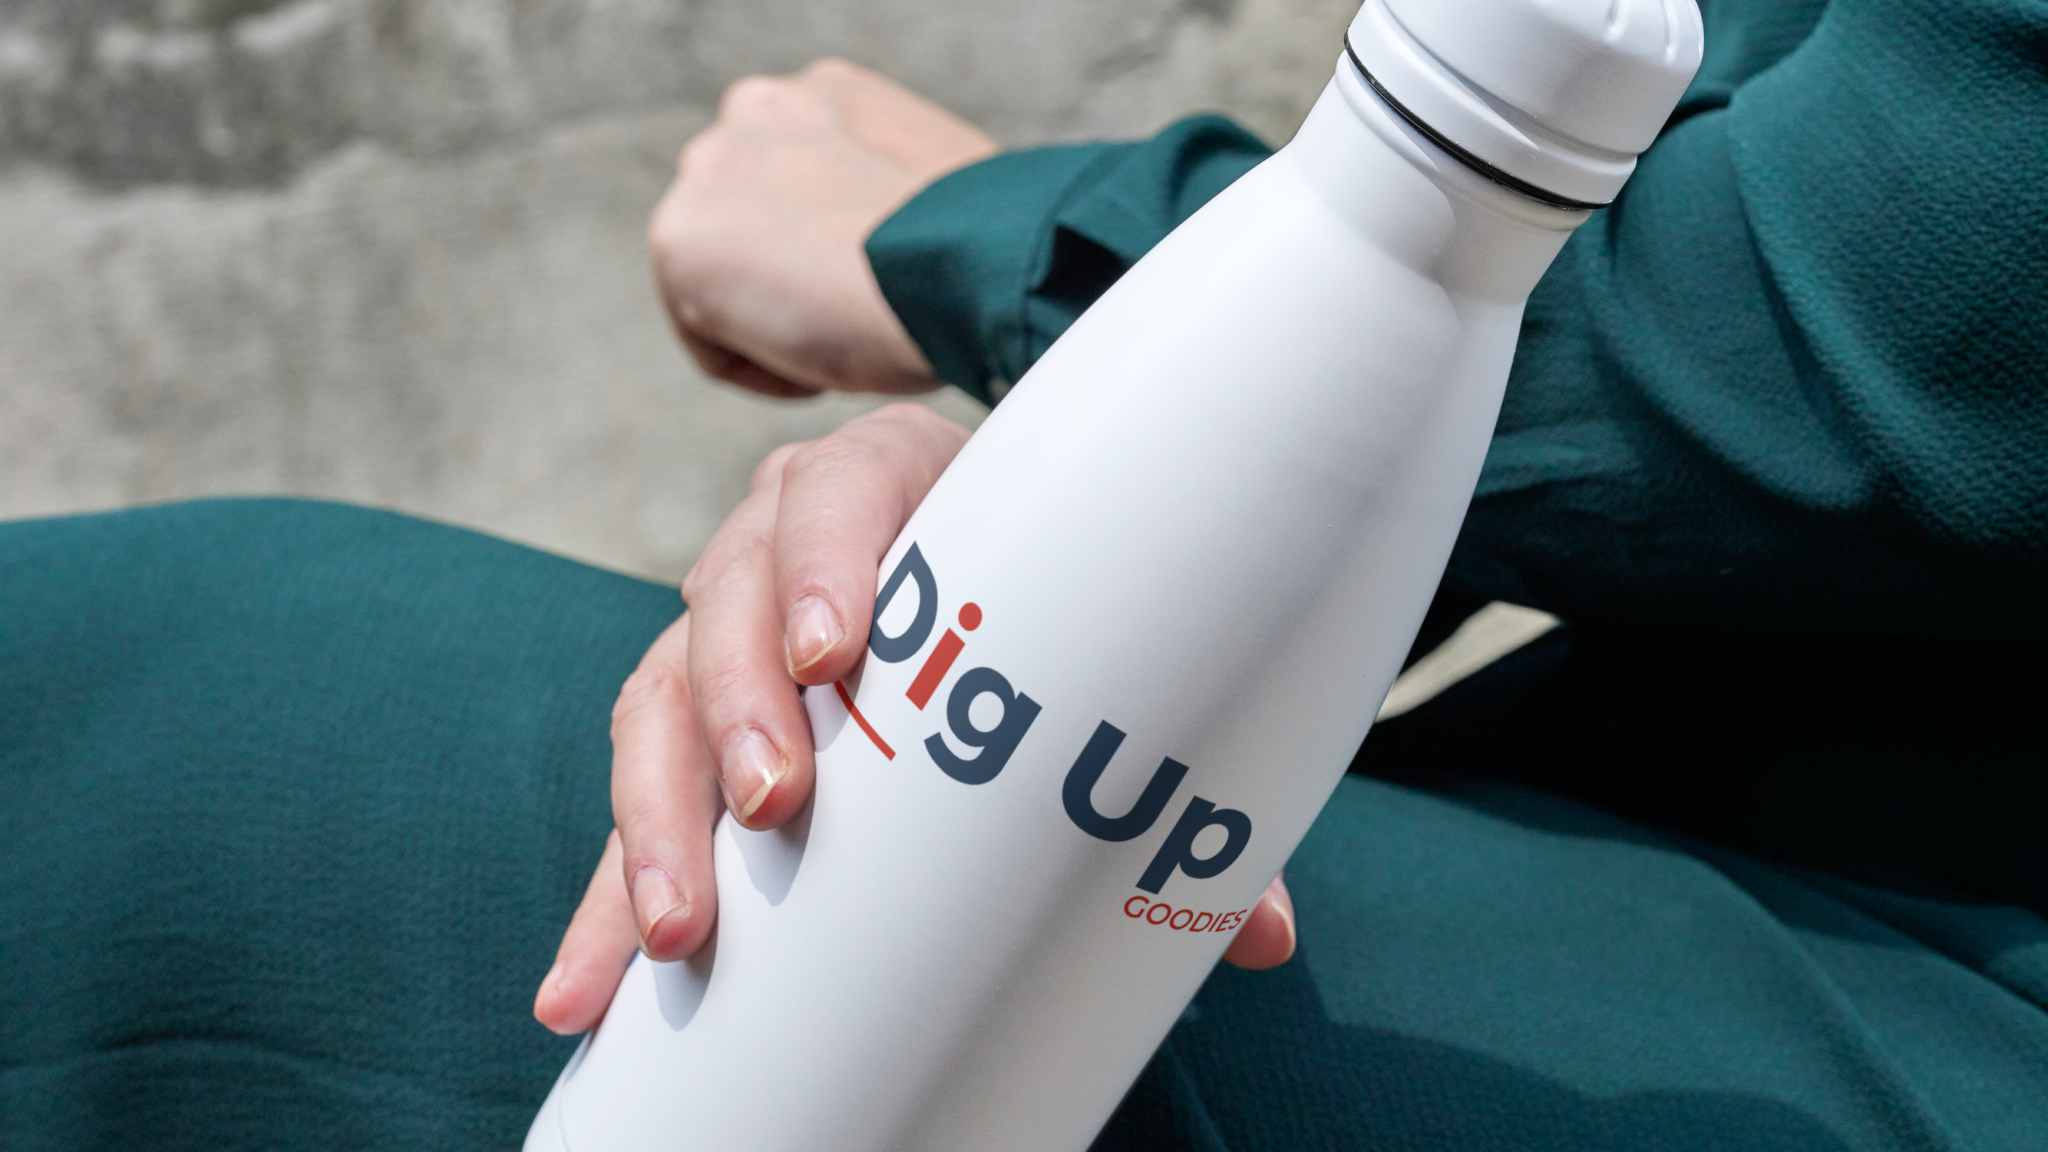 Water bottle in the hand of a woman_Dig_Up-removebg-preview